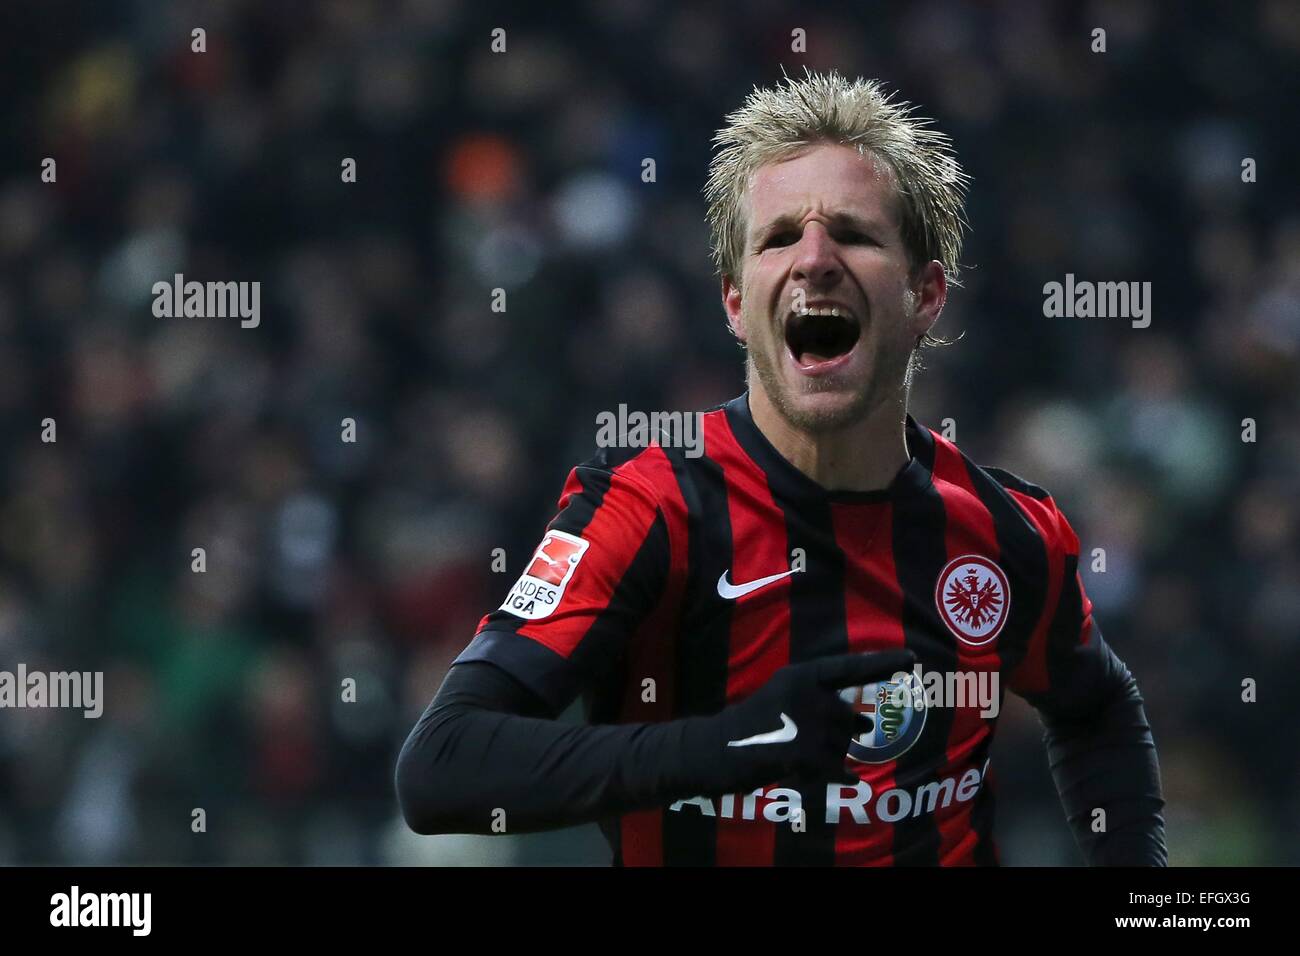 Stefan aigner hi-res stock photography and images - Alamy